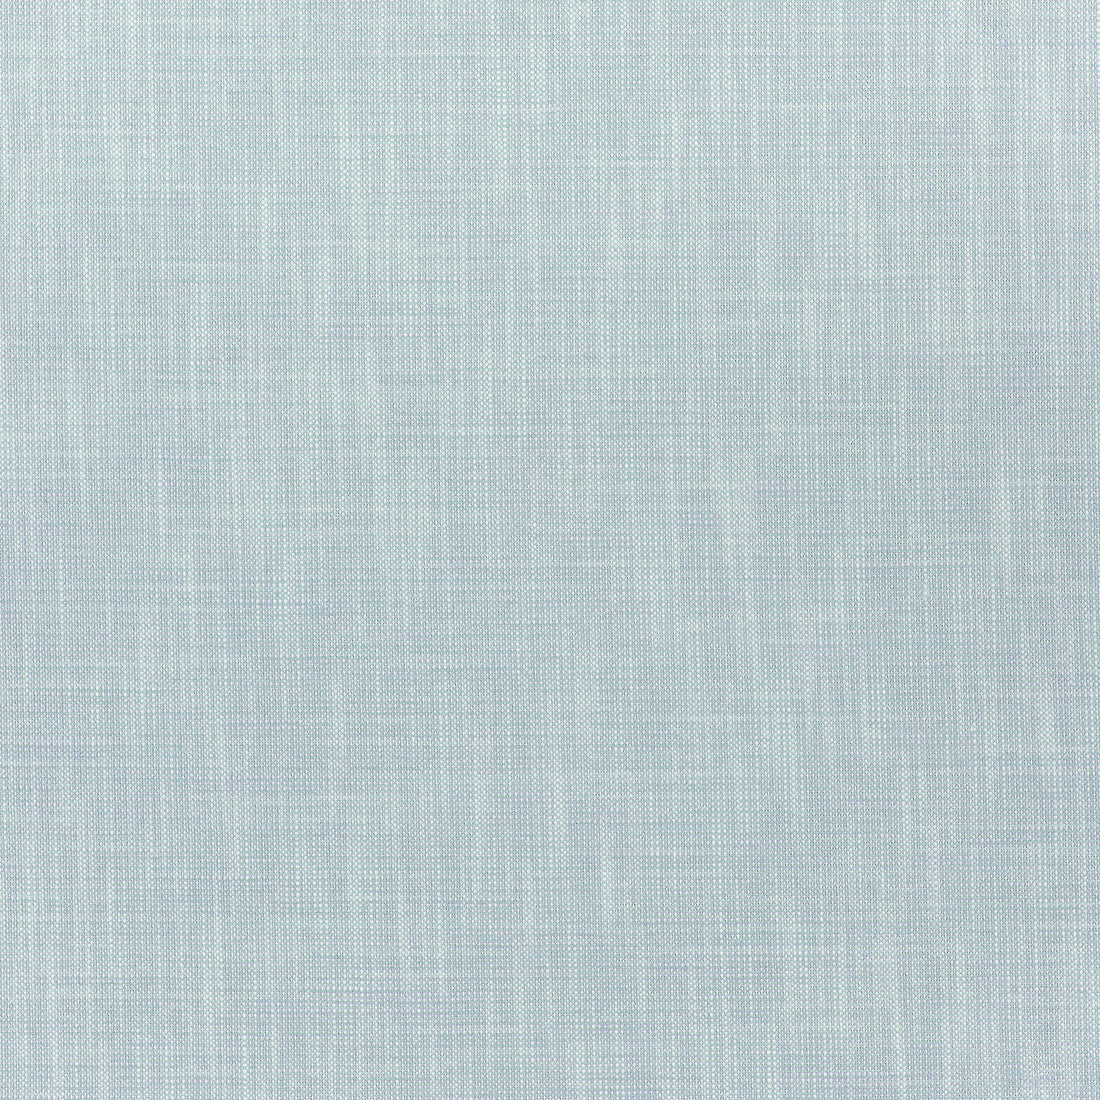 Bailey fabric in mist color - pattern number W80495 - by Thibaut in the Mosaic collection